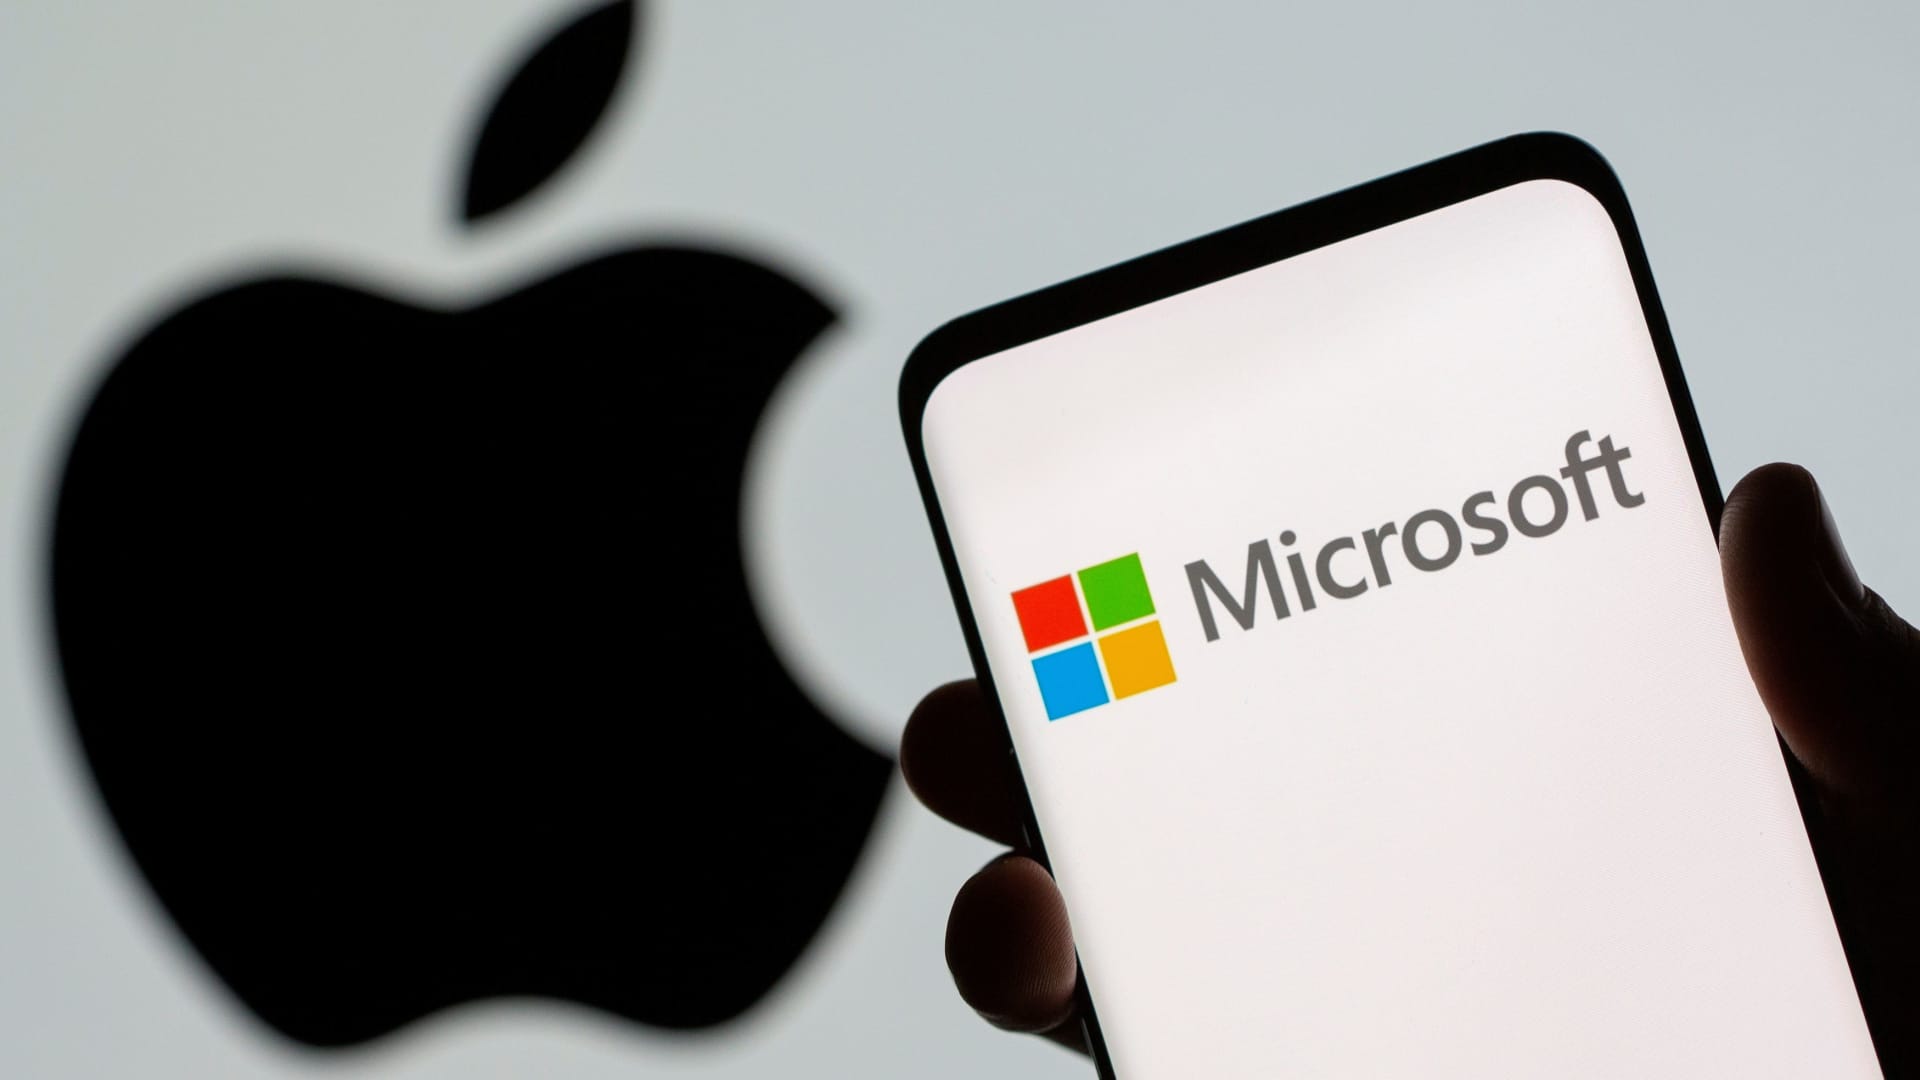 Apple vs. Microsoft? One outperforming fund manager picks his favorite — and explains why